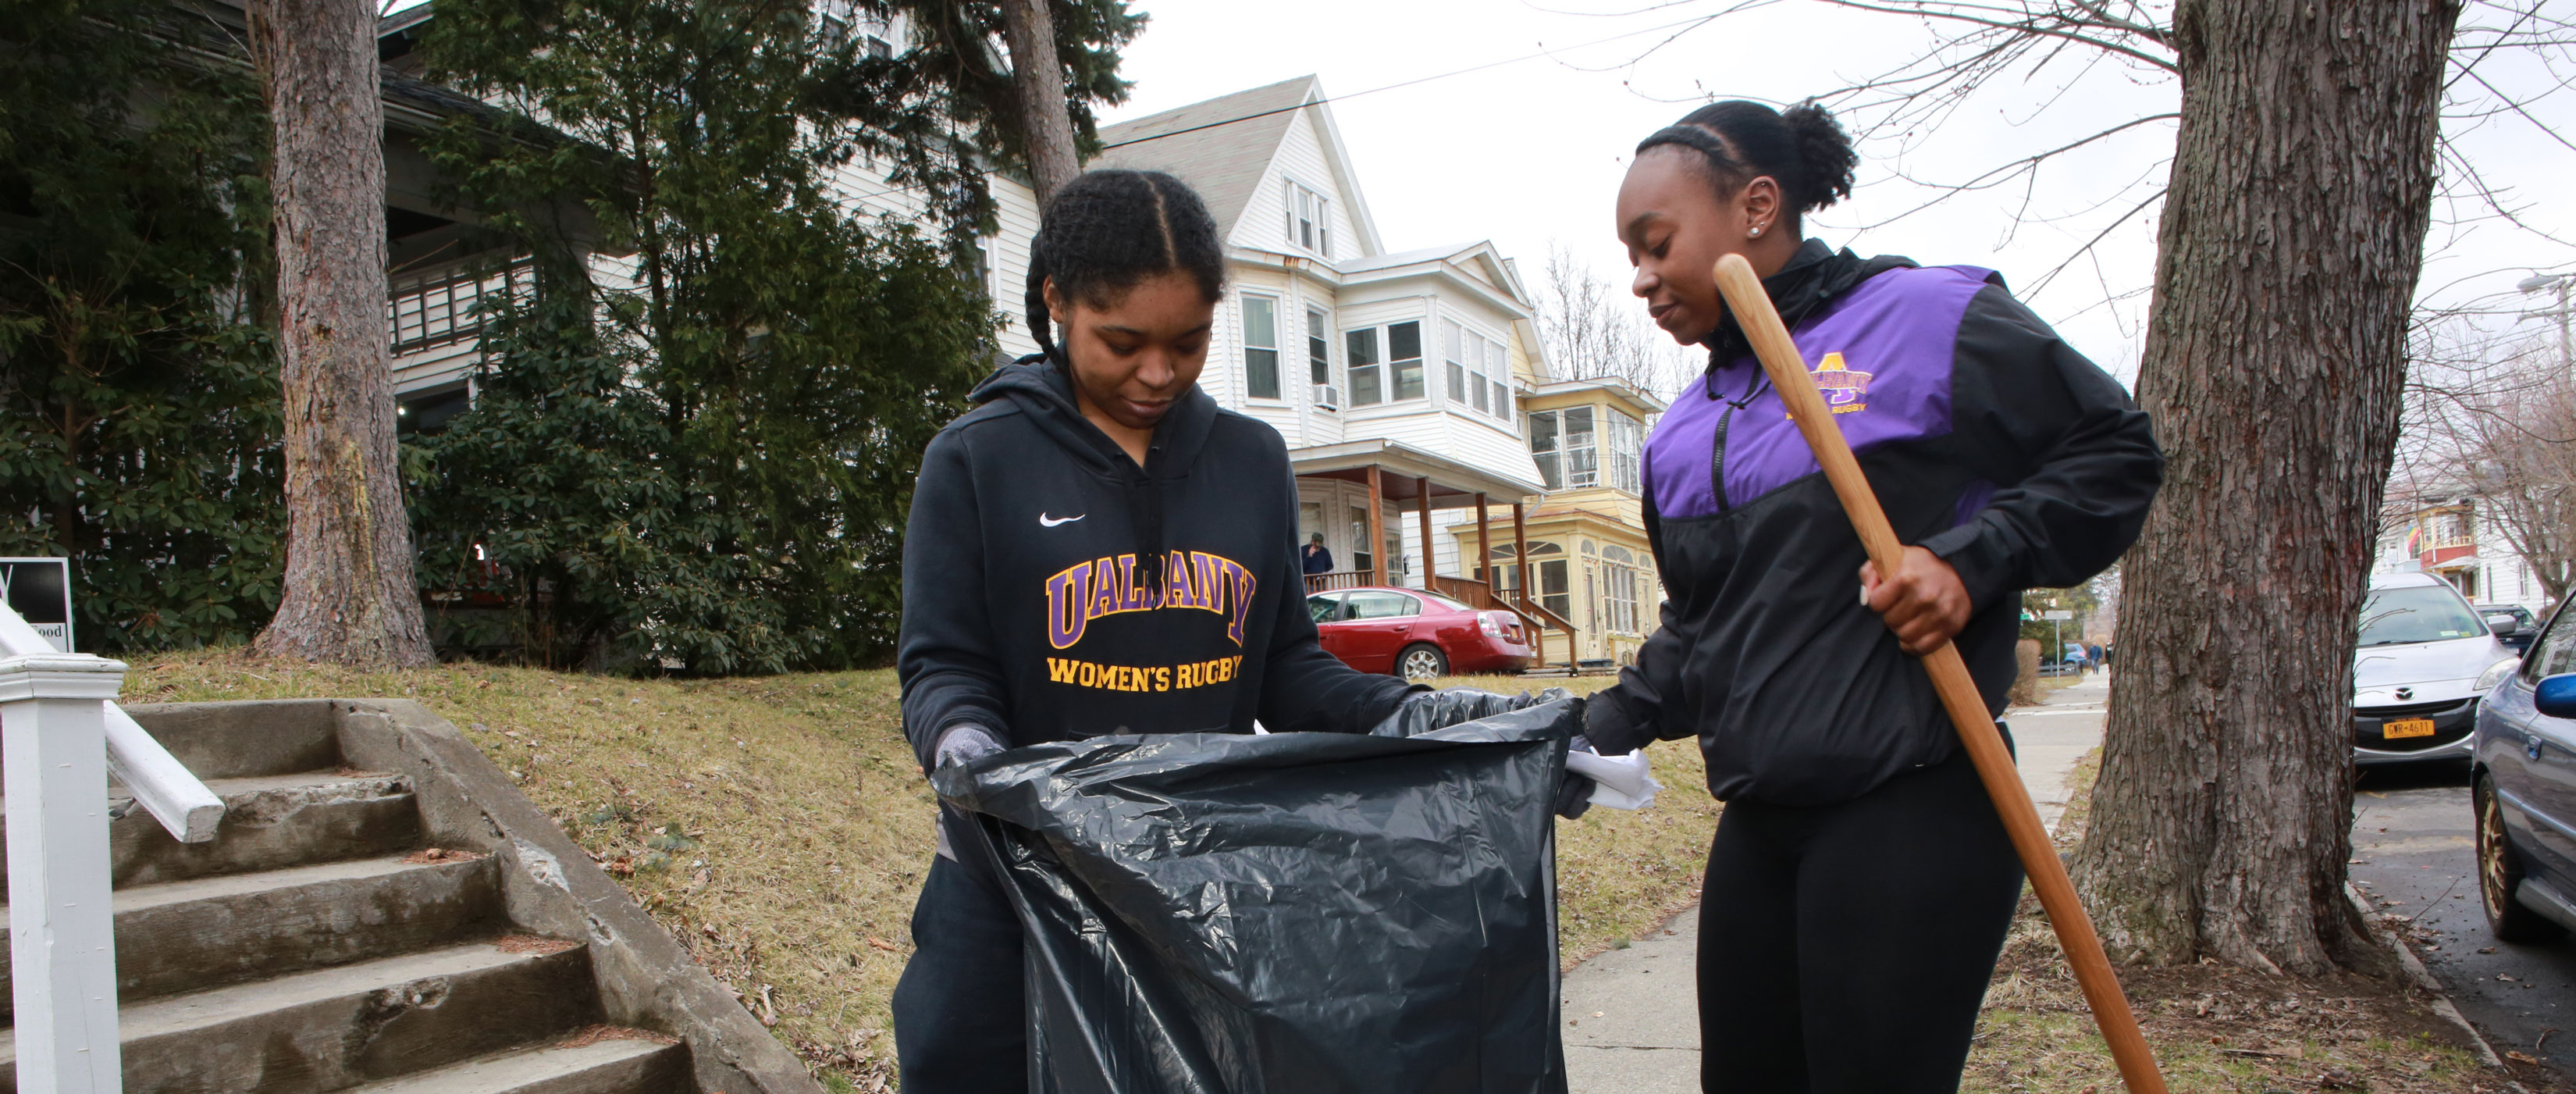 Two students hold a black trash bag open as they participate in a Pine Hills neighborhood clean-up.